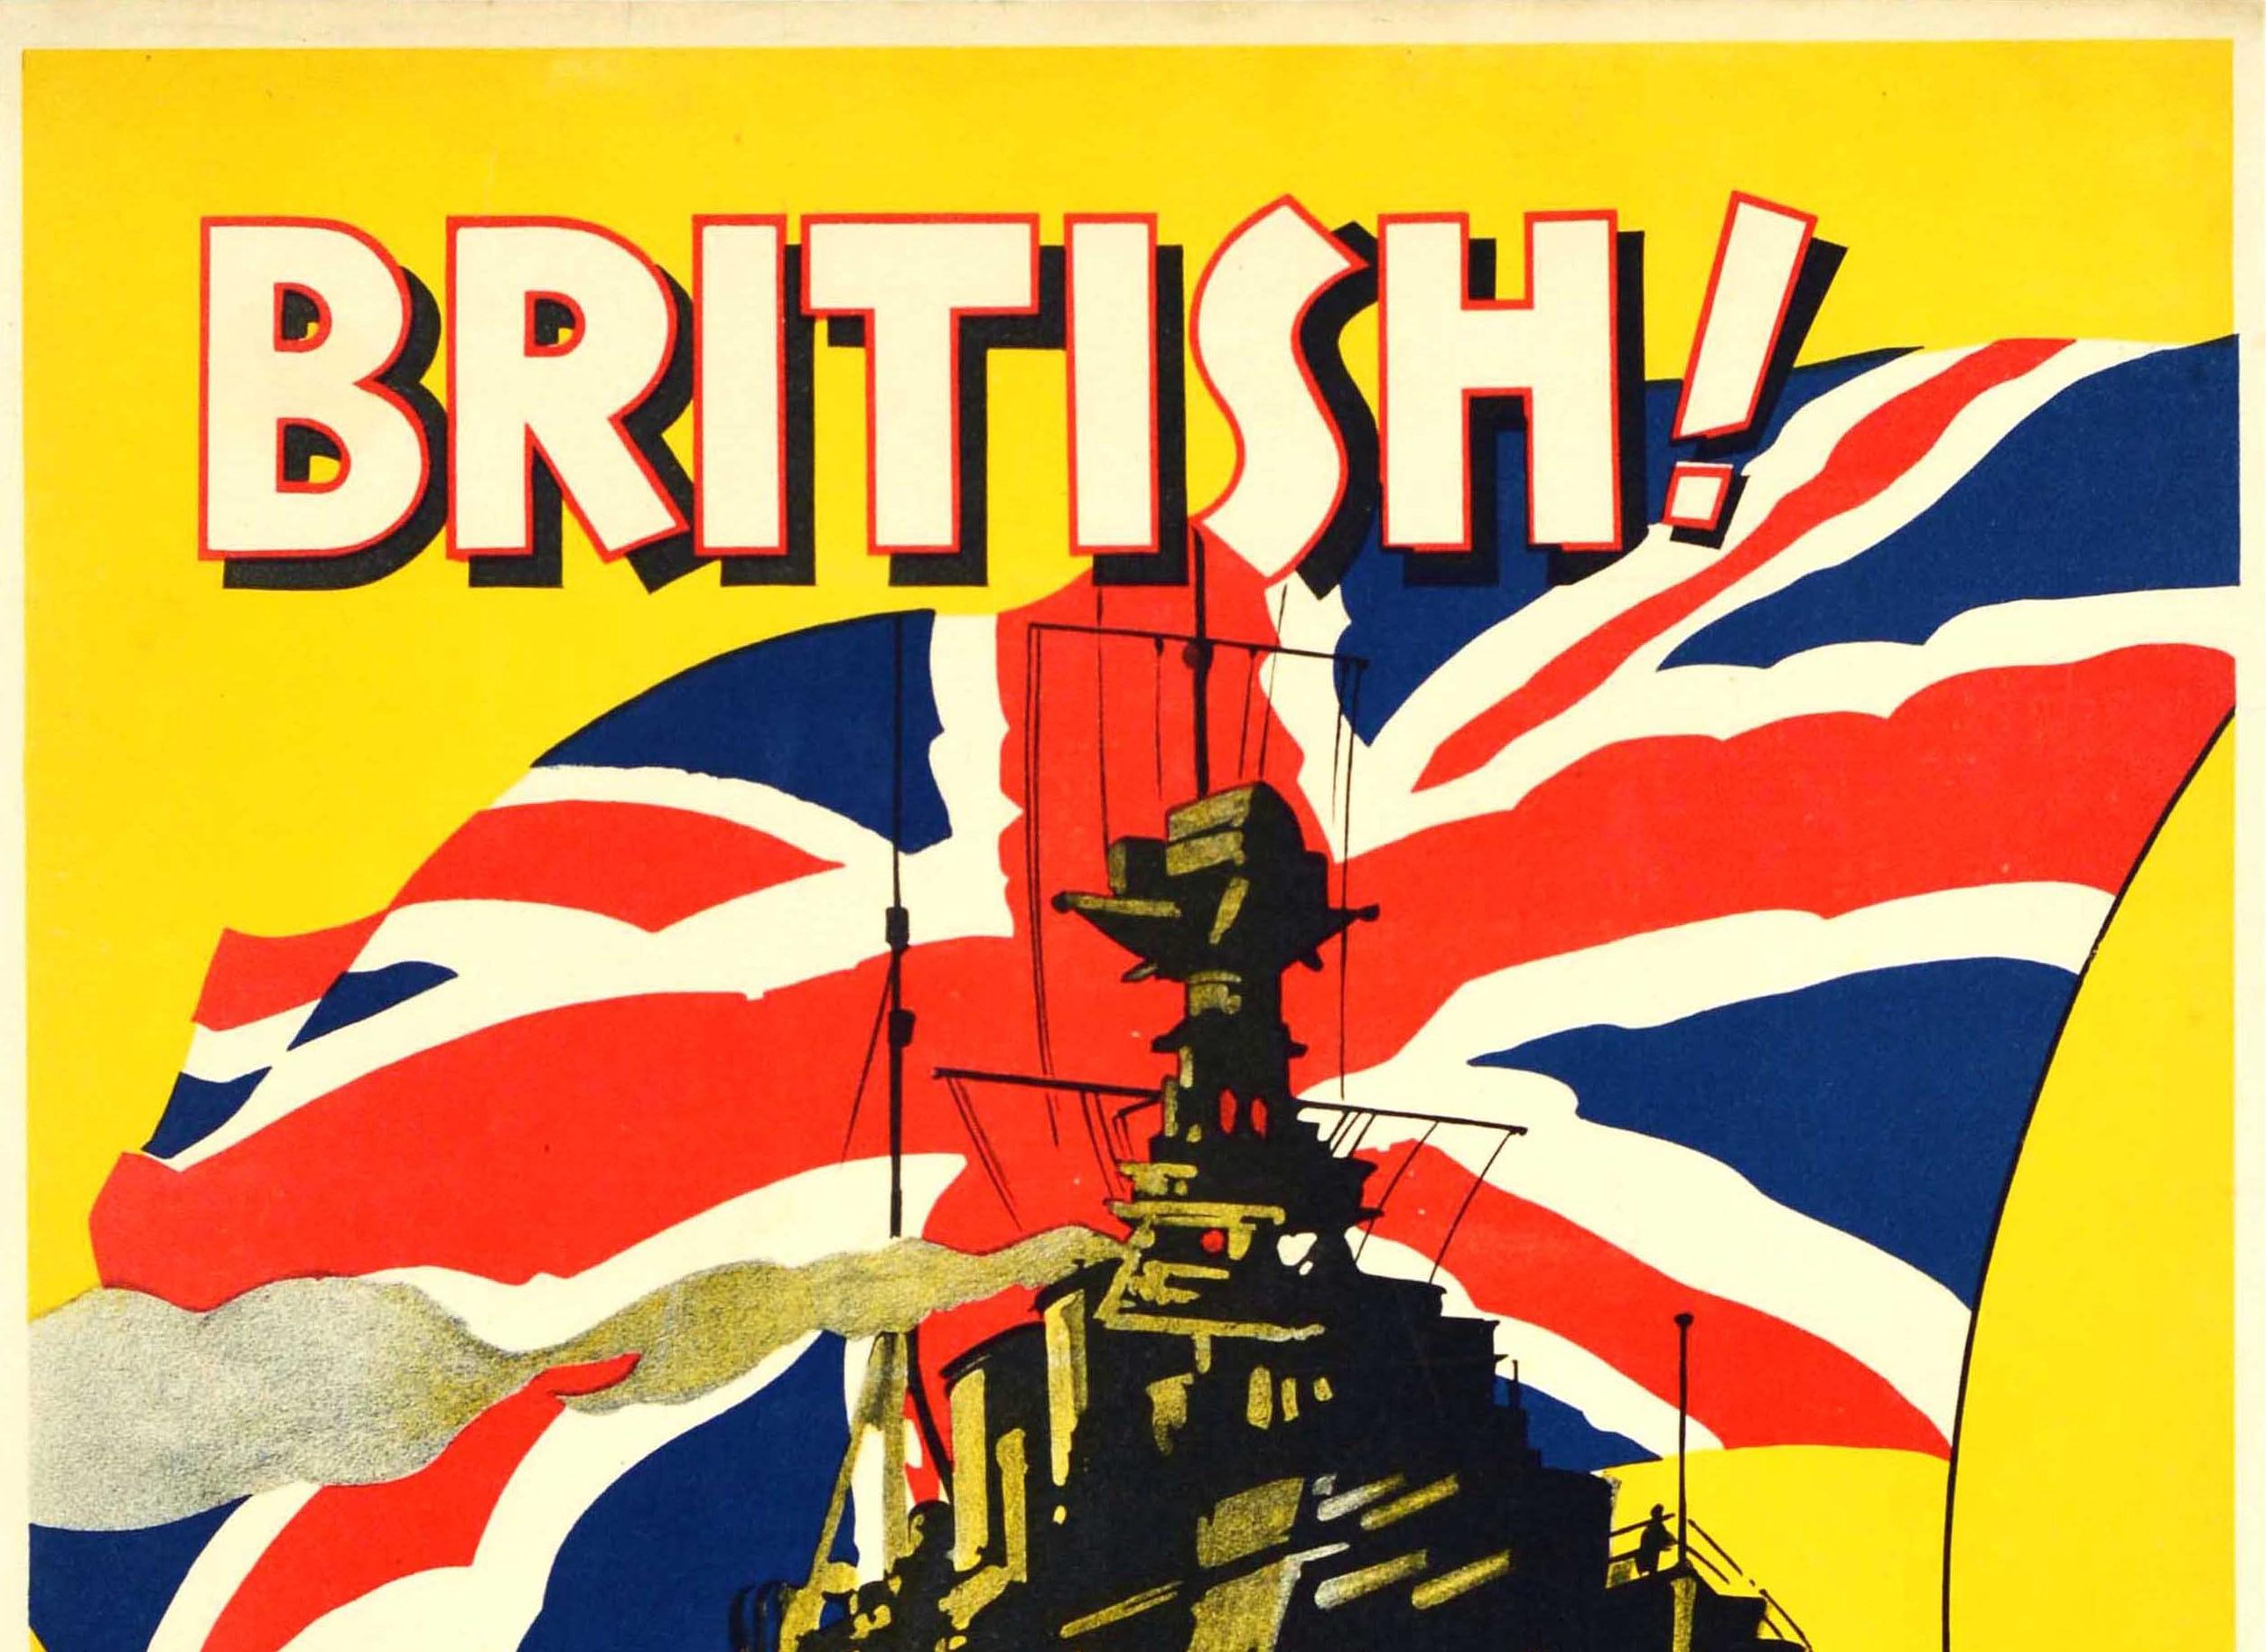 Original Vintage Motivation Poster British And Proud Of It Bill Jones Union Jack - Print by Unknown